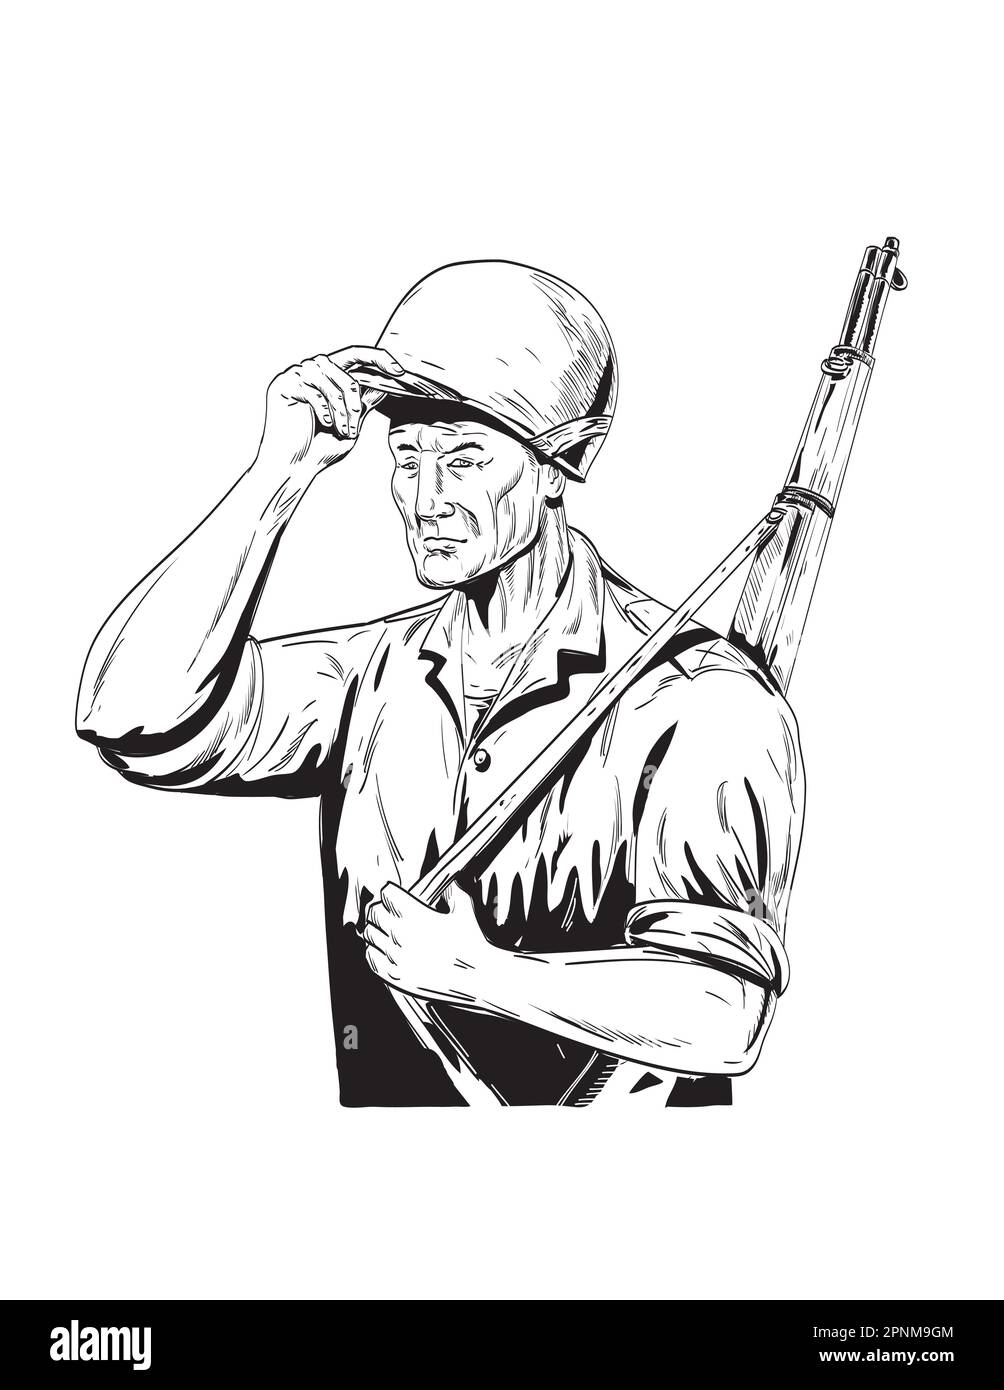 Comics style drawing or illustration of a World War Two American GI soldier tipping lifting his helmet viewed from side on isolated background done in Stock Photo